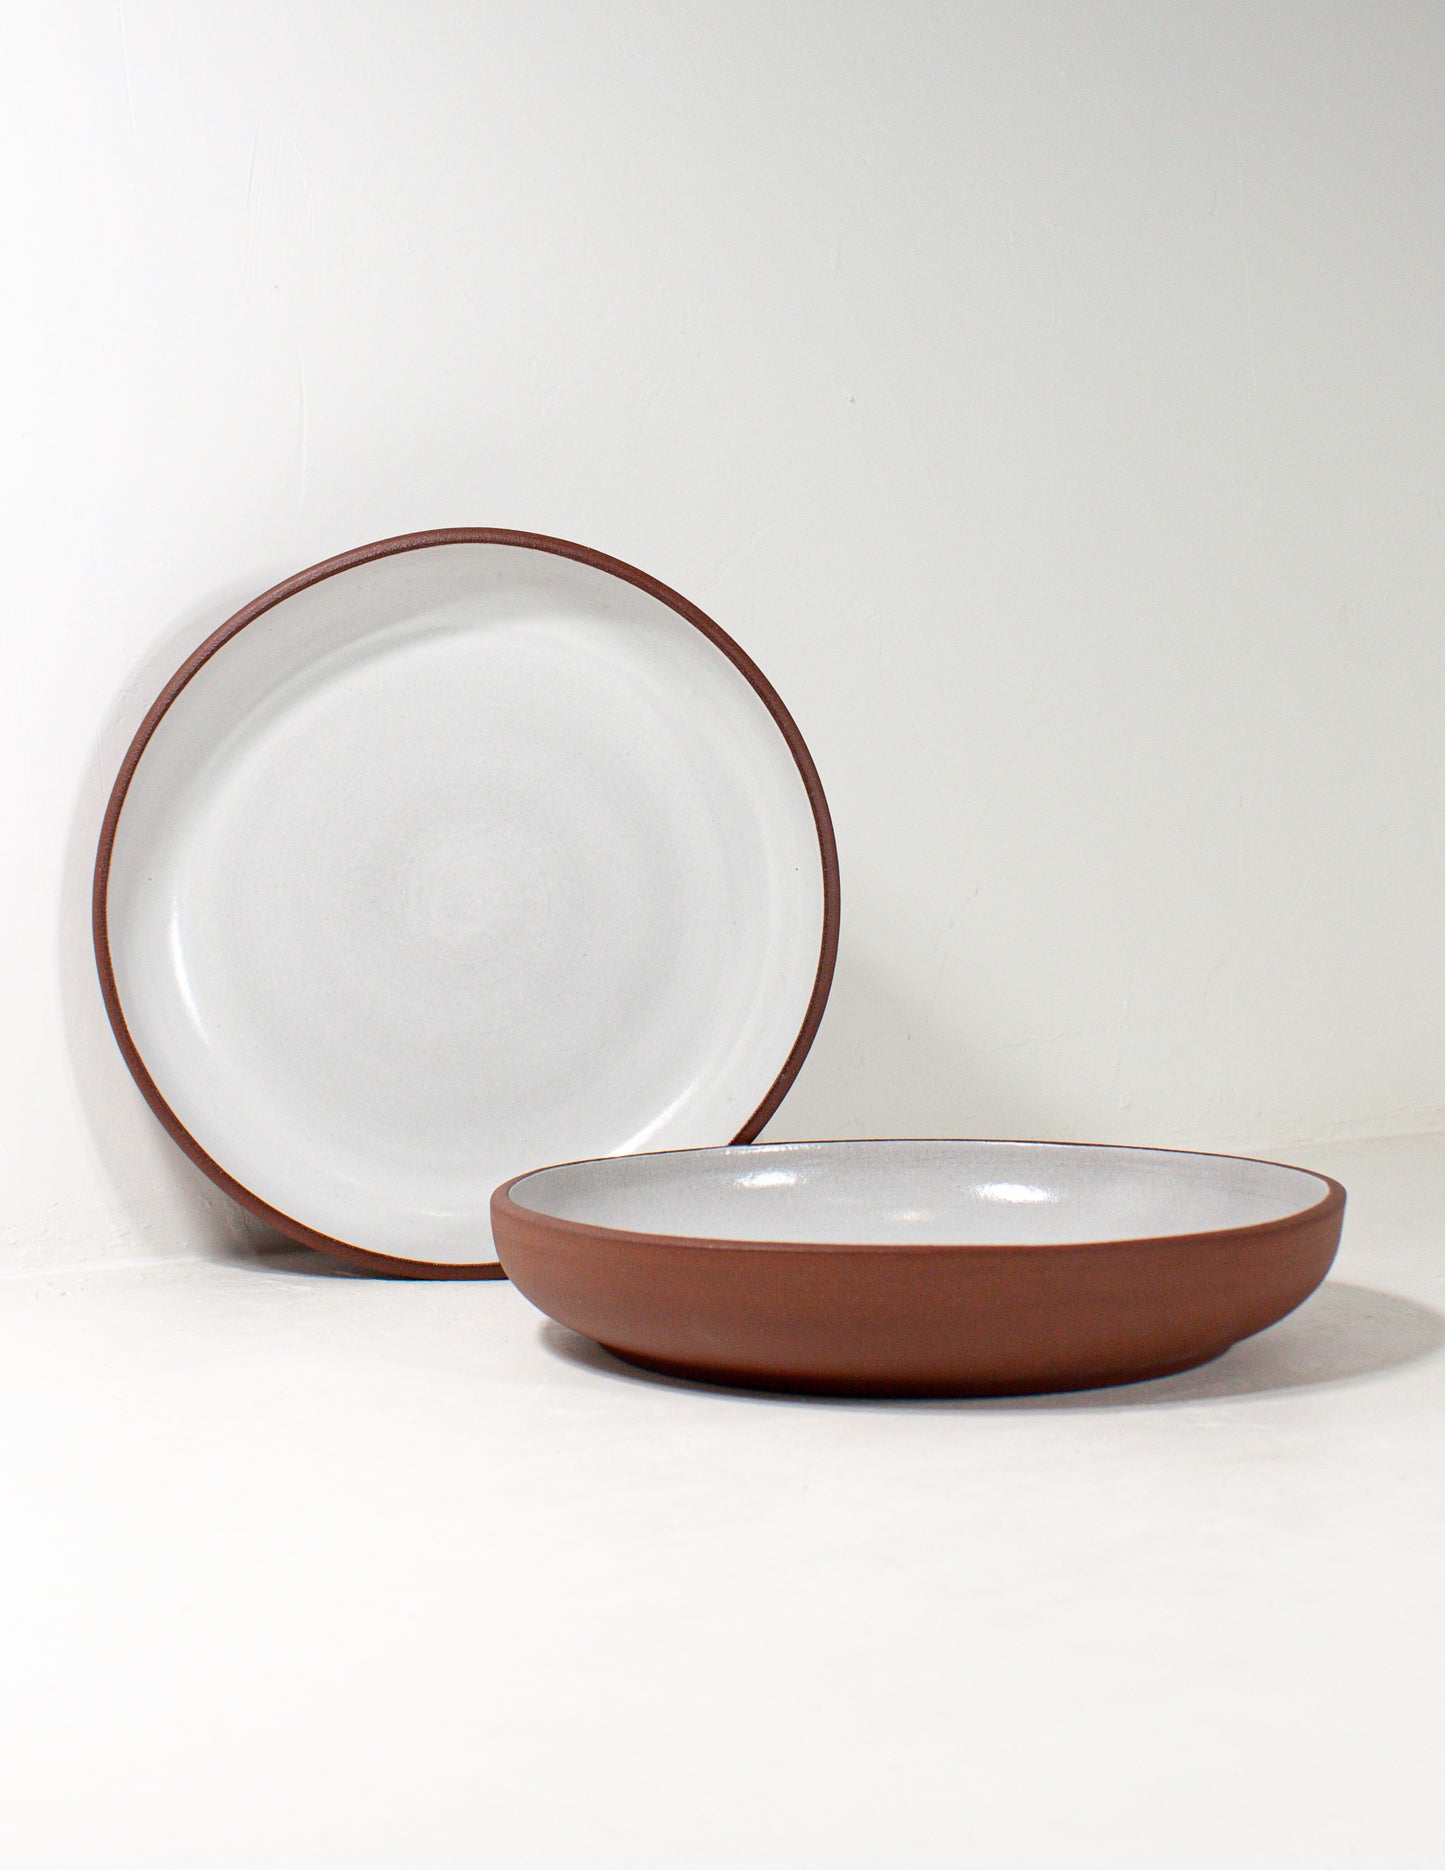 Handmade serving bowl that is ready for your restaurant or home kitchen